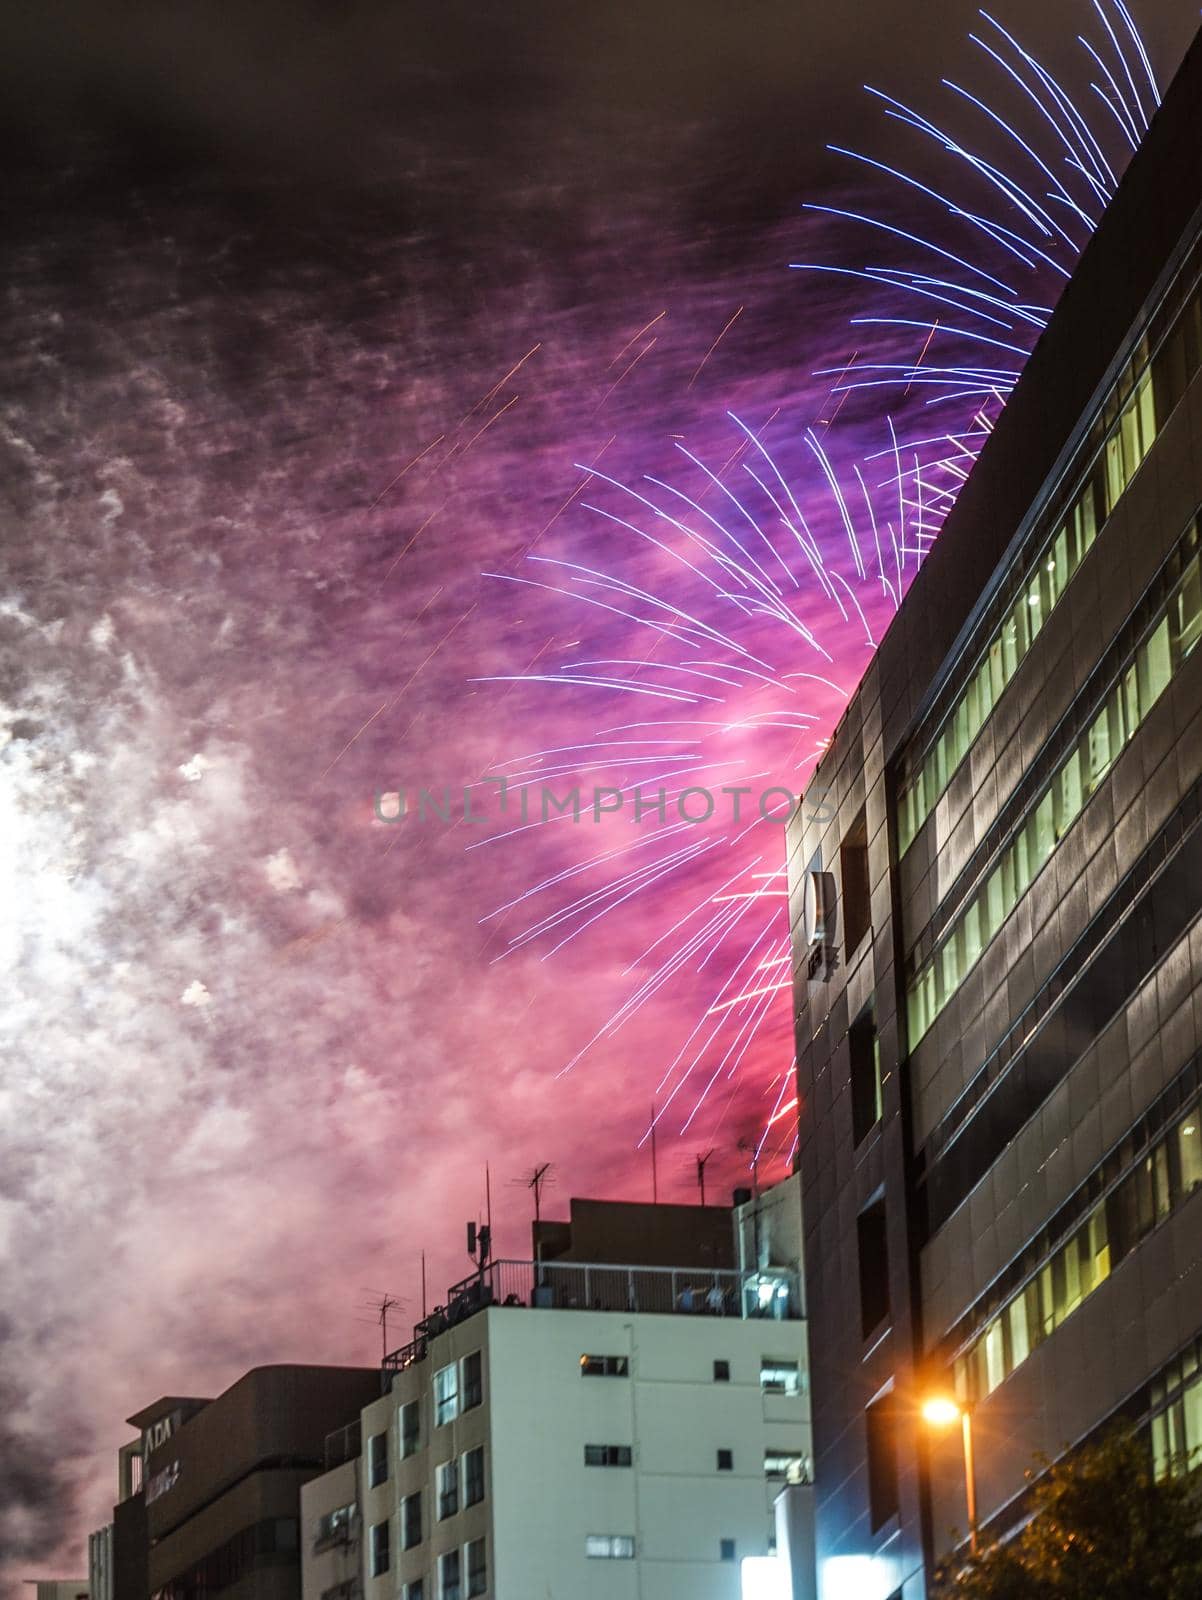 Fireworks seen from the valley of the building. Shooting Location: Tokyo metropolitan area